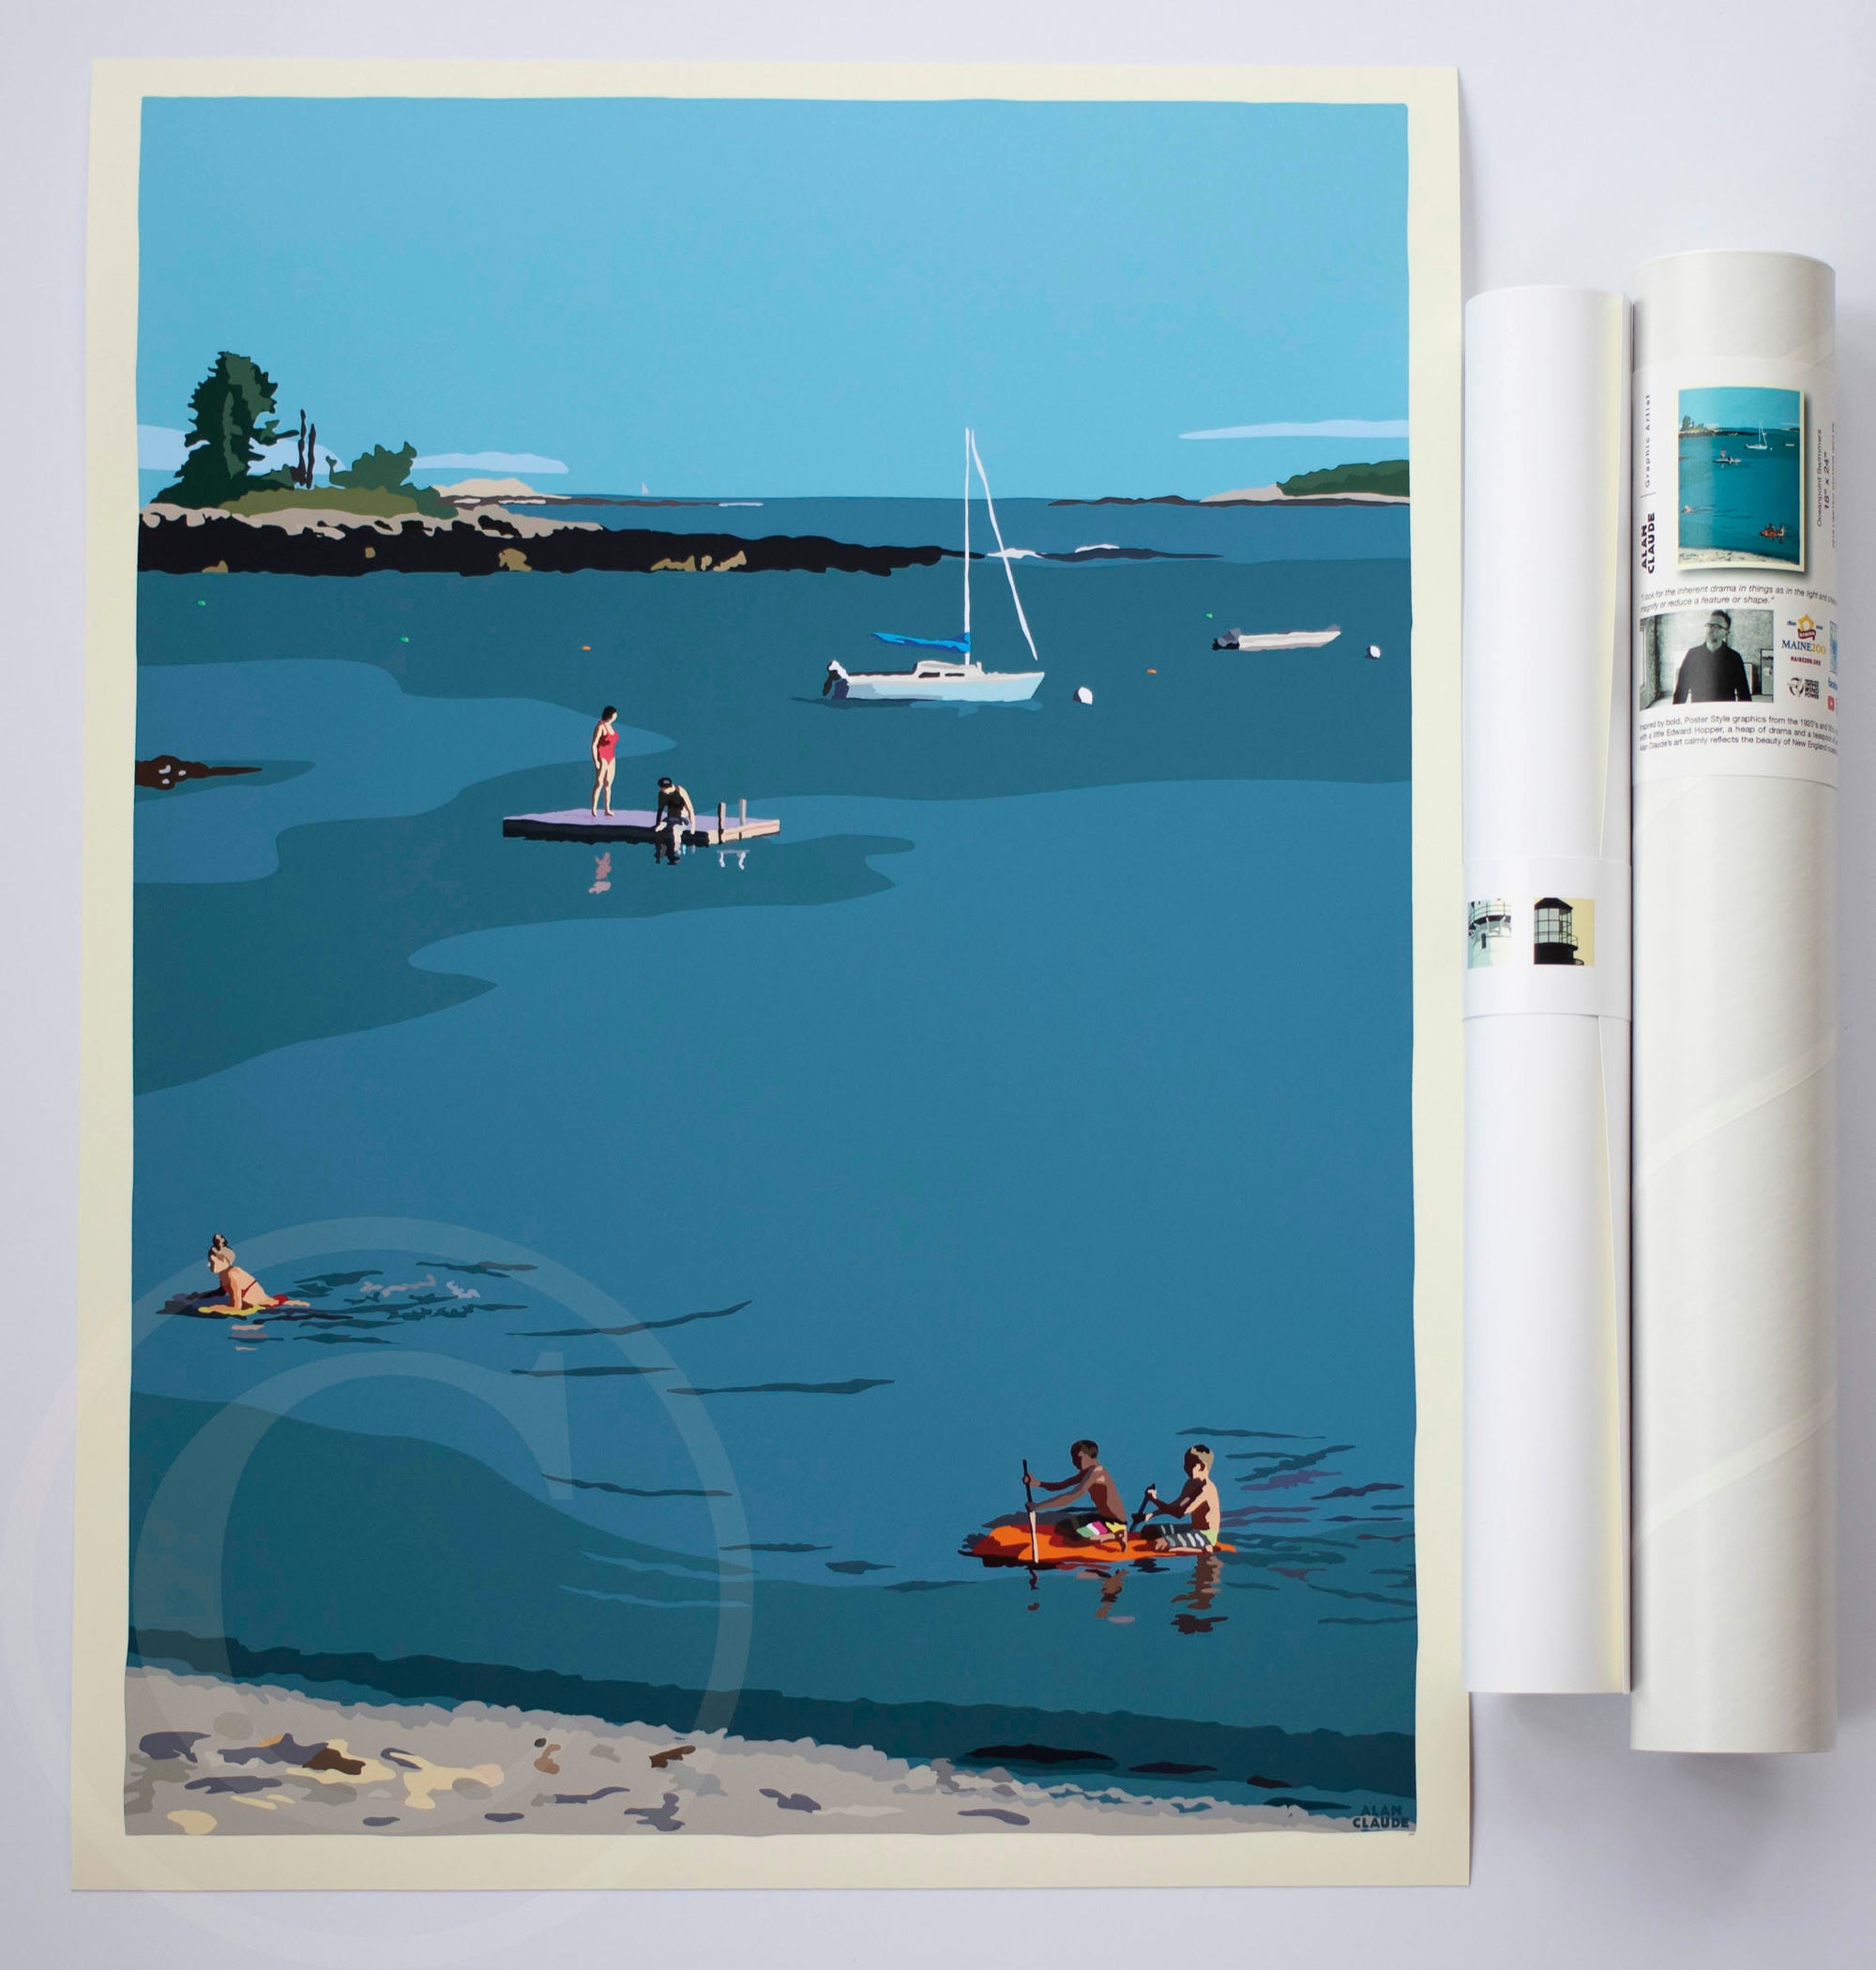 Ocean Point Swimmers Art Print 18" x 24" Wall Poster by Alan Claude - Maine